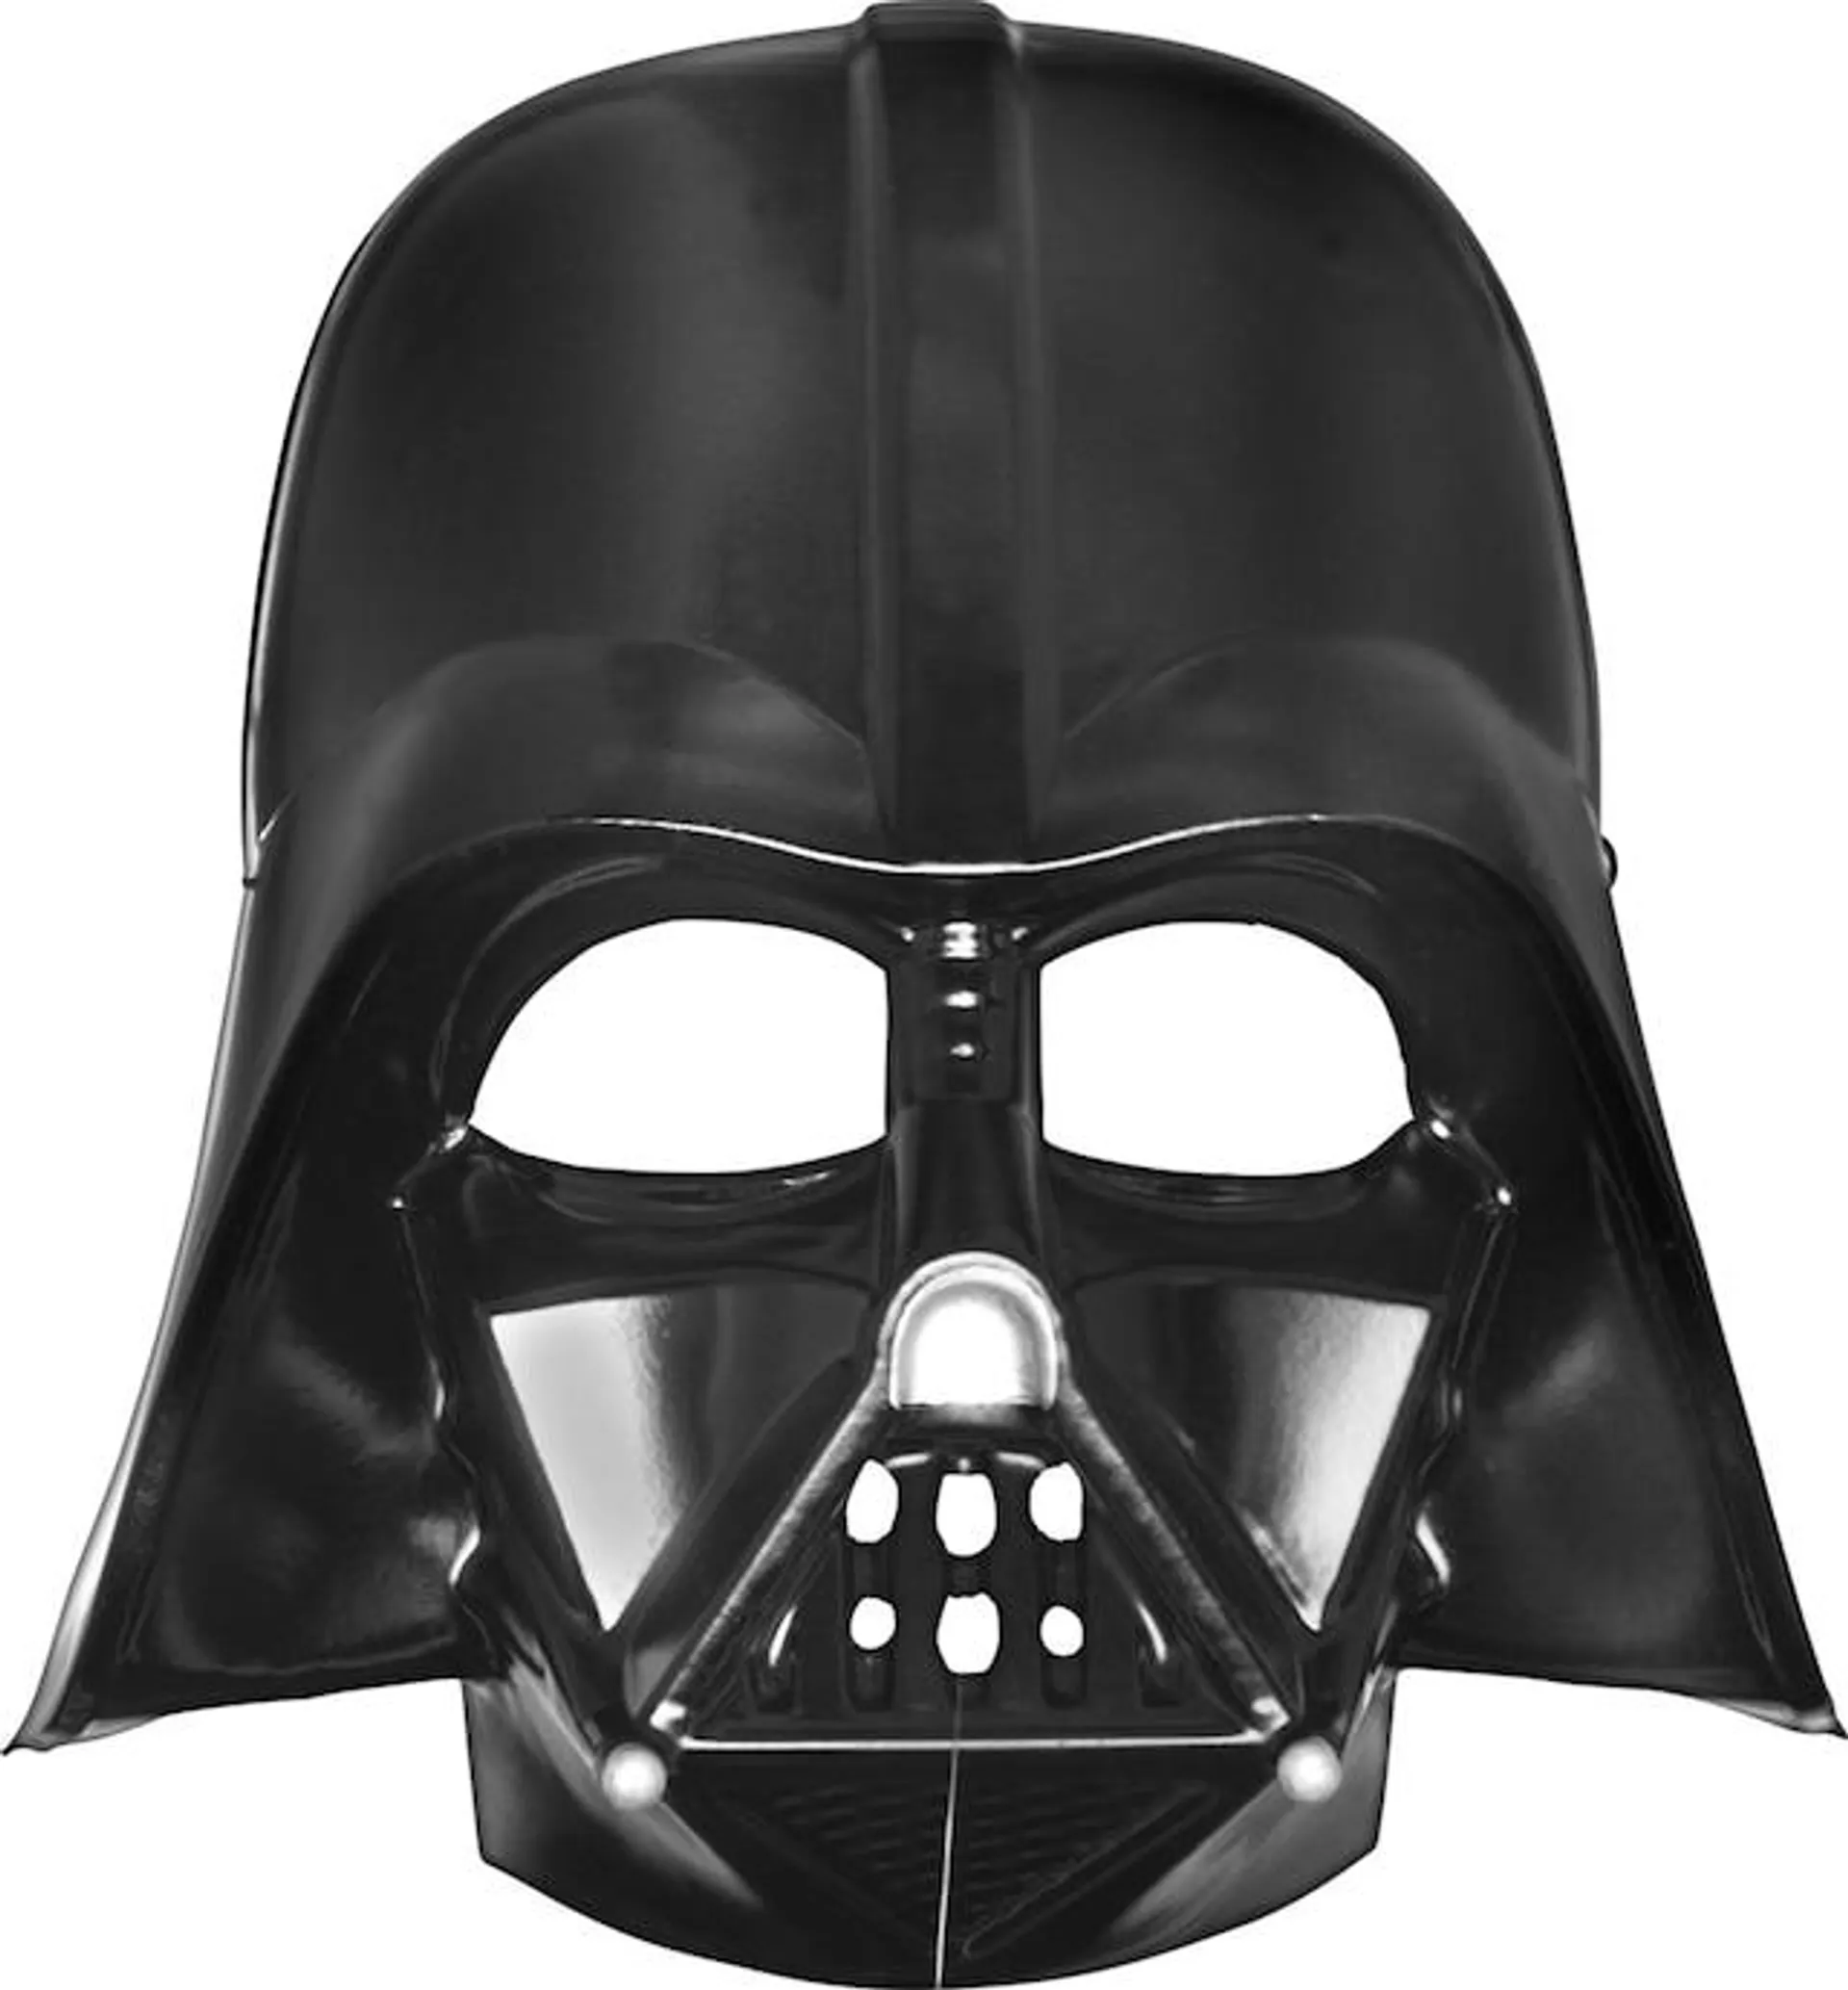 Disney Star Wars Darth Vader Plastic Mask, Black, One Size, Wearable Costume Accessory for Halloween